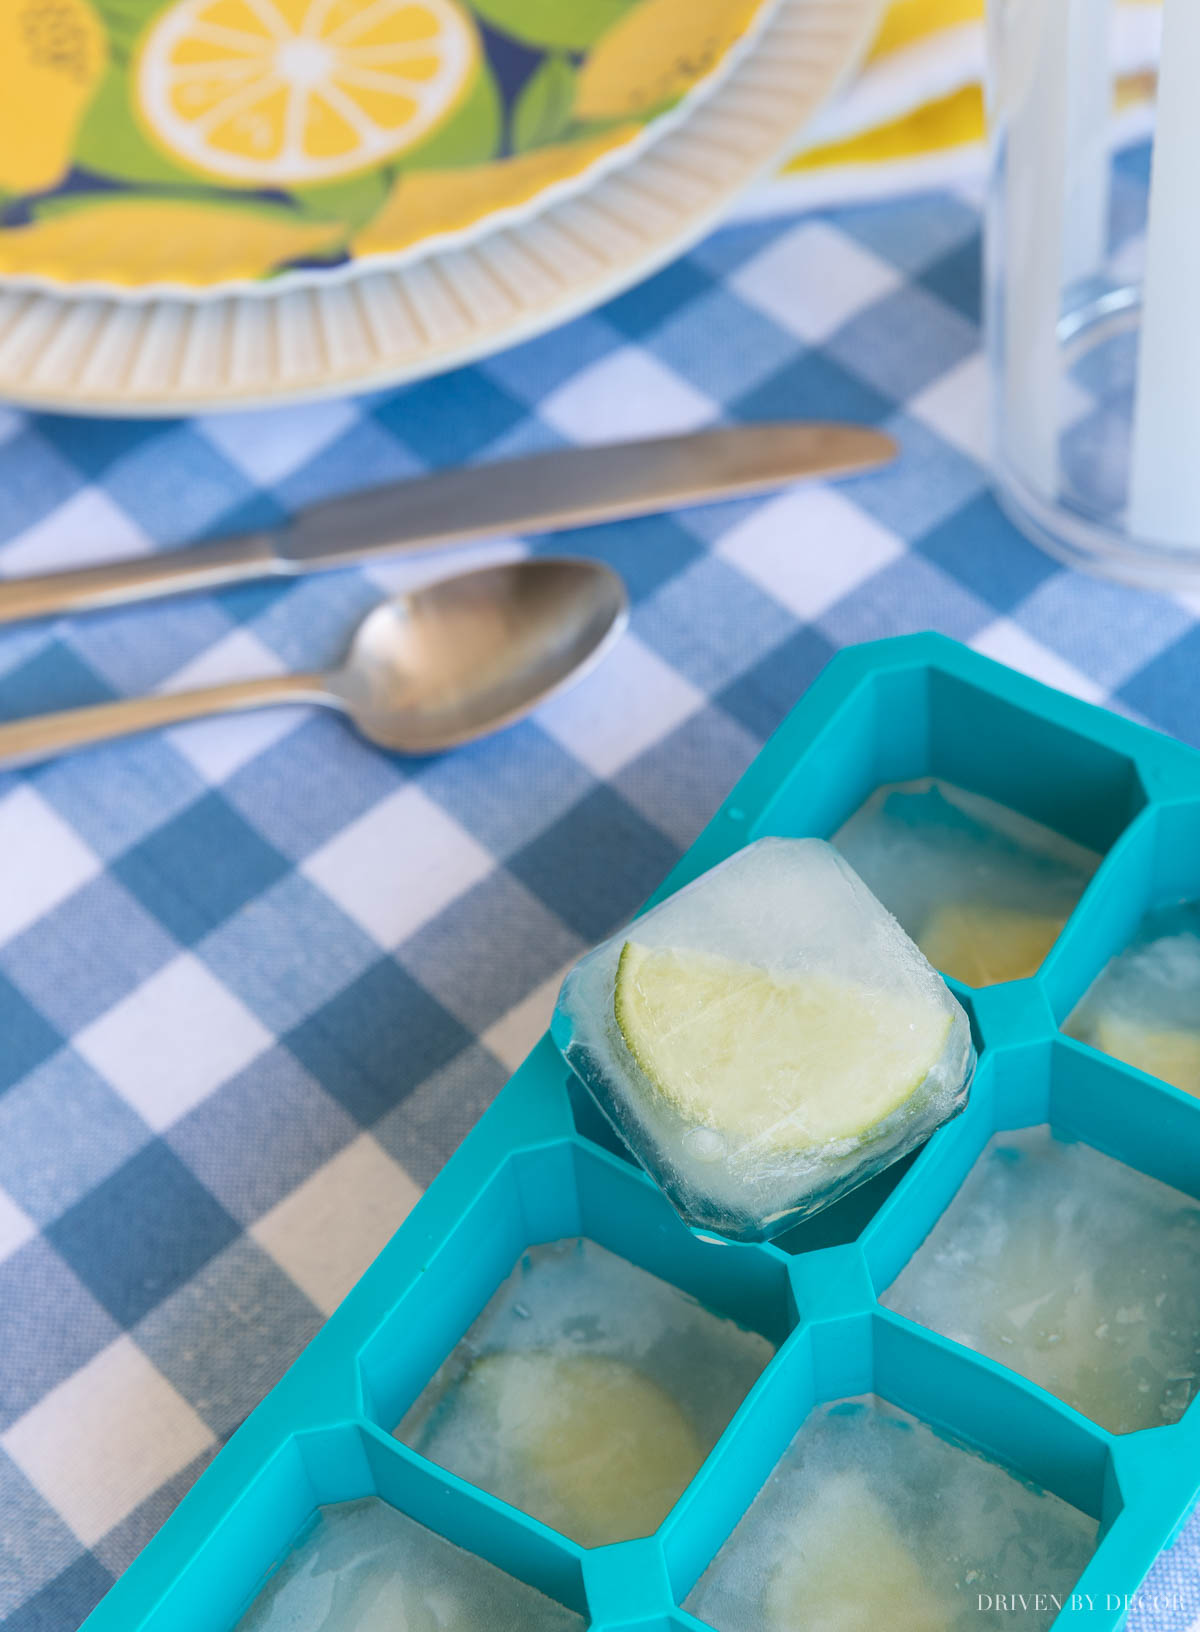 Adding small slices of lemons or limes to these silicone ice cube trays is fun for outdoor entertaining!